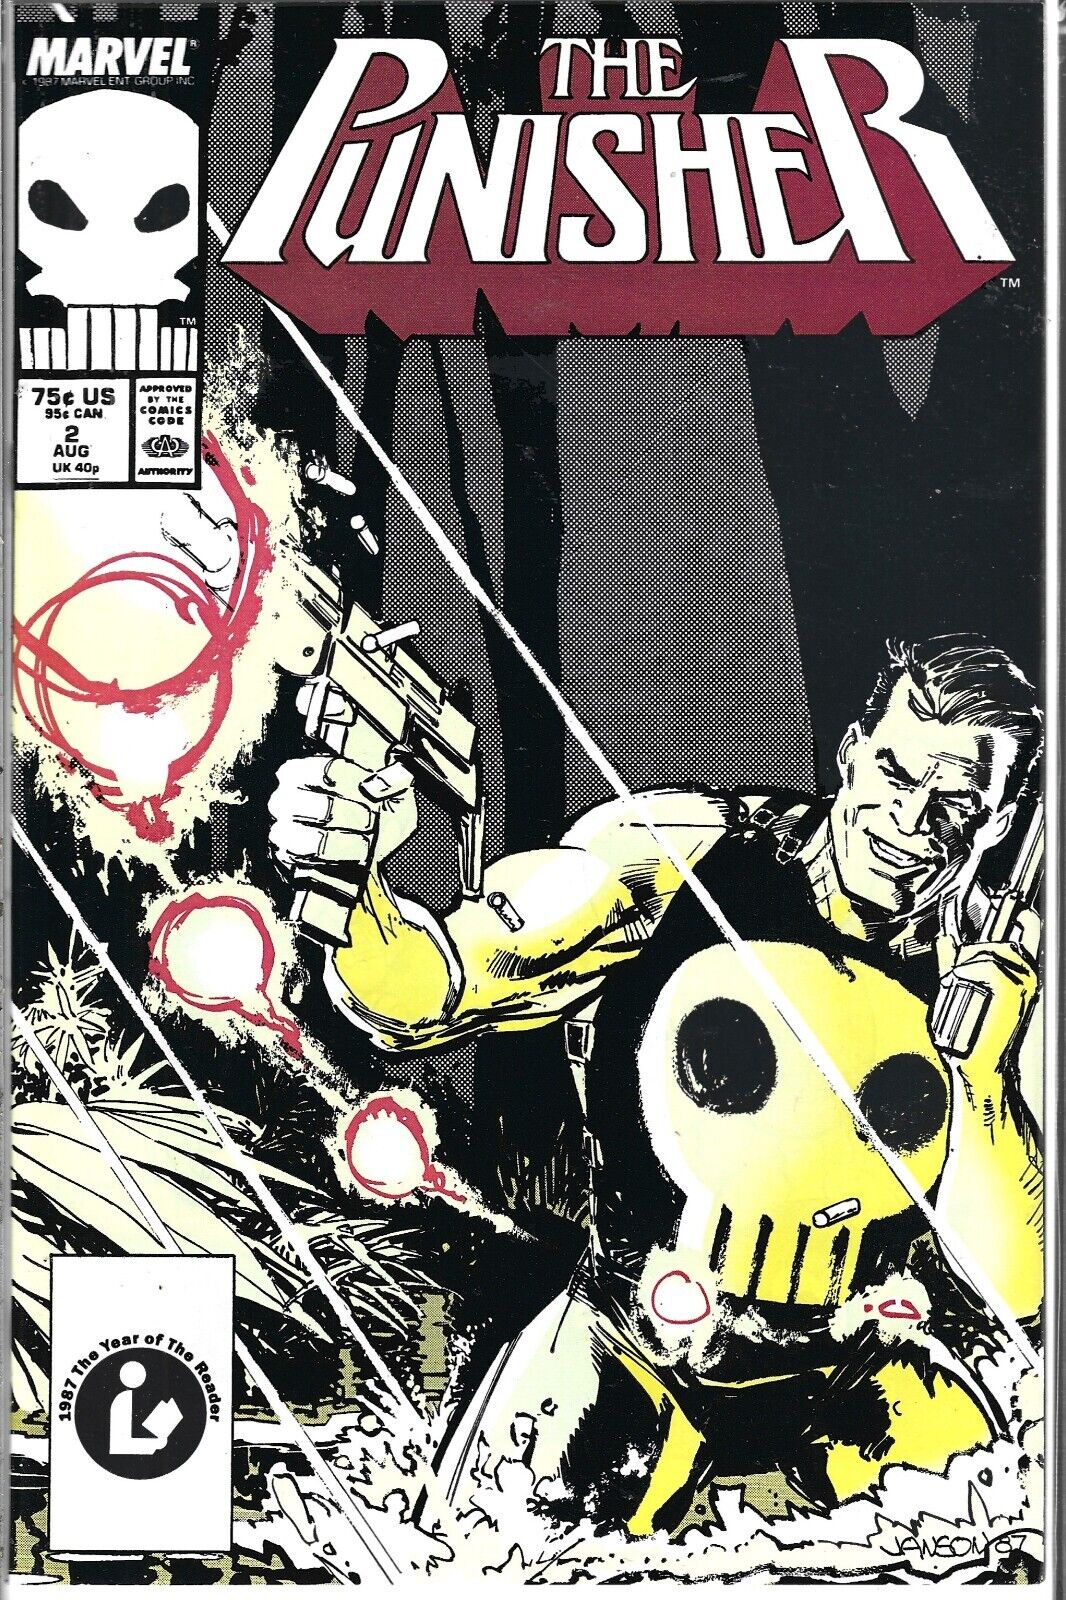 THE PUNISHER #2 (NM) HIGH GRADE COPPER AGE MARVEL, $3.95 FLAT RATE SHIPPING